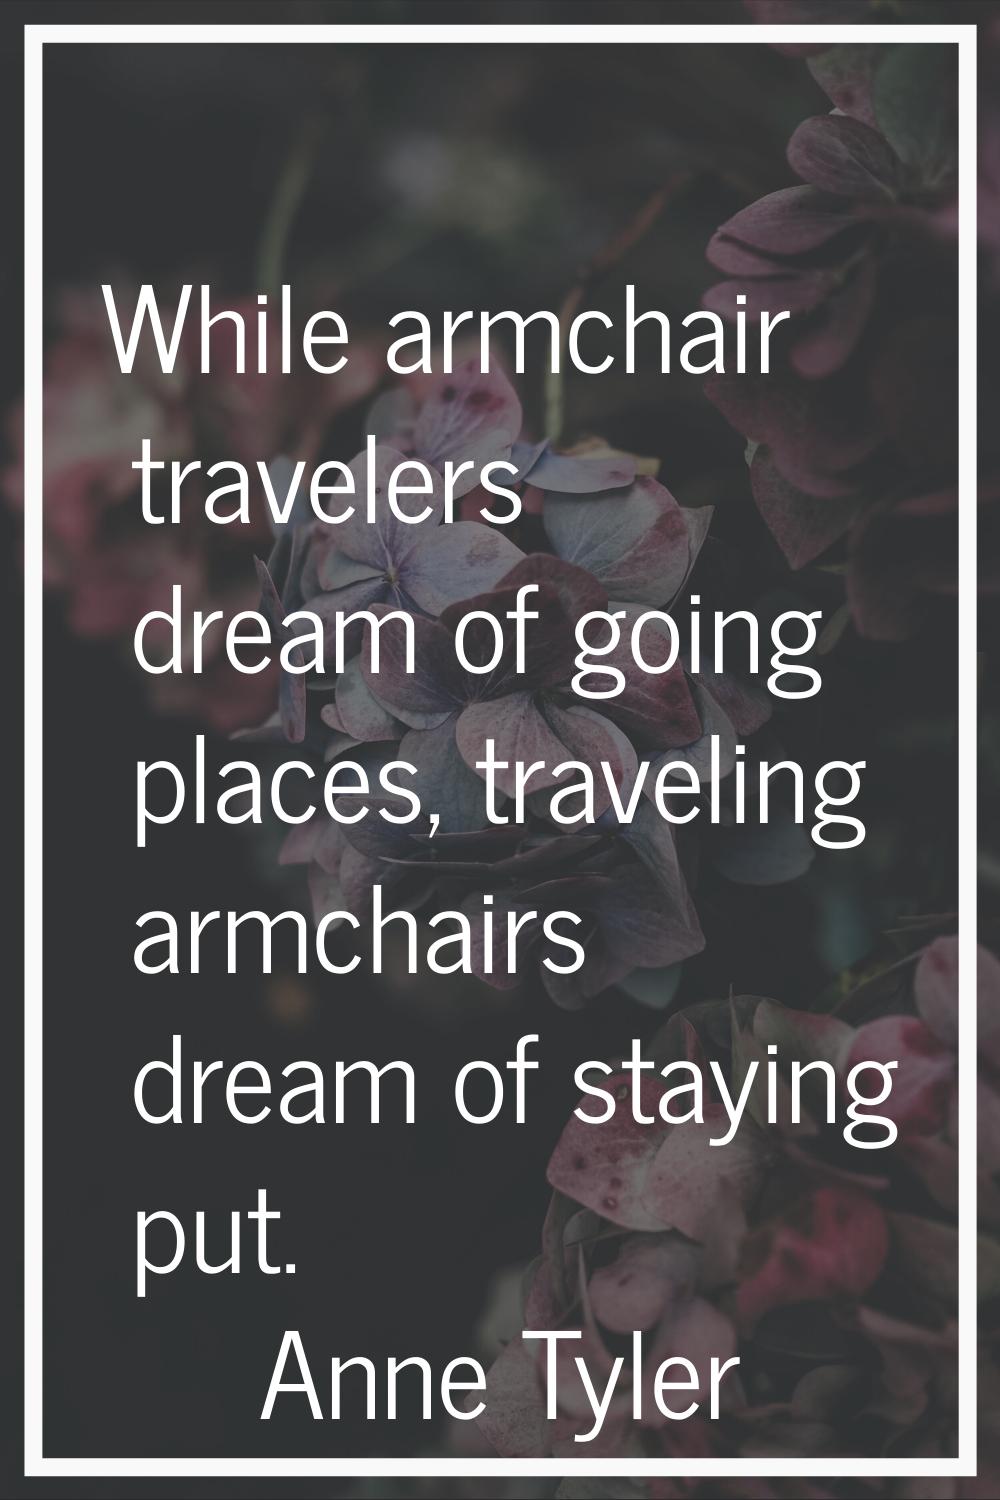 While armchair travelers dream of going places, traveling armchairs dream of staying put.